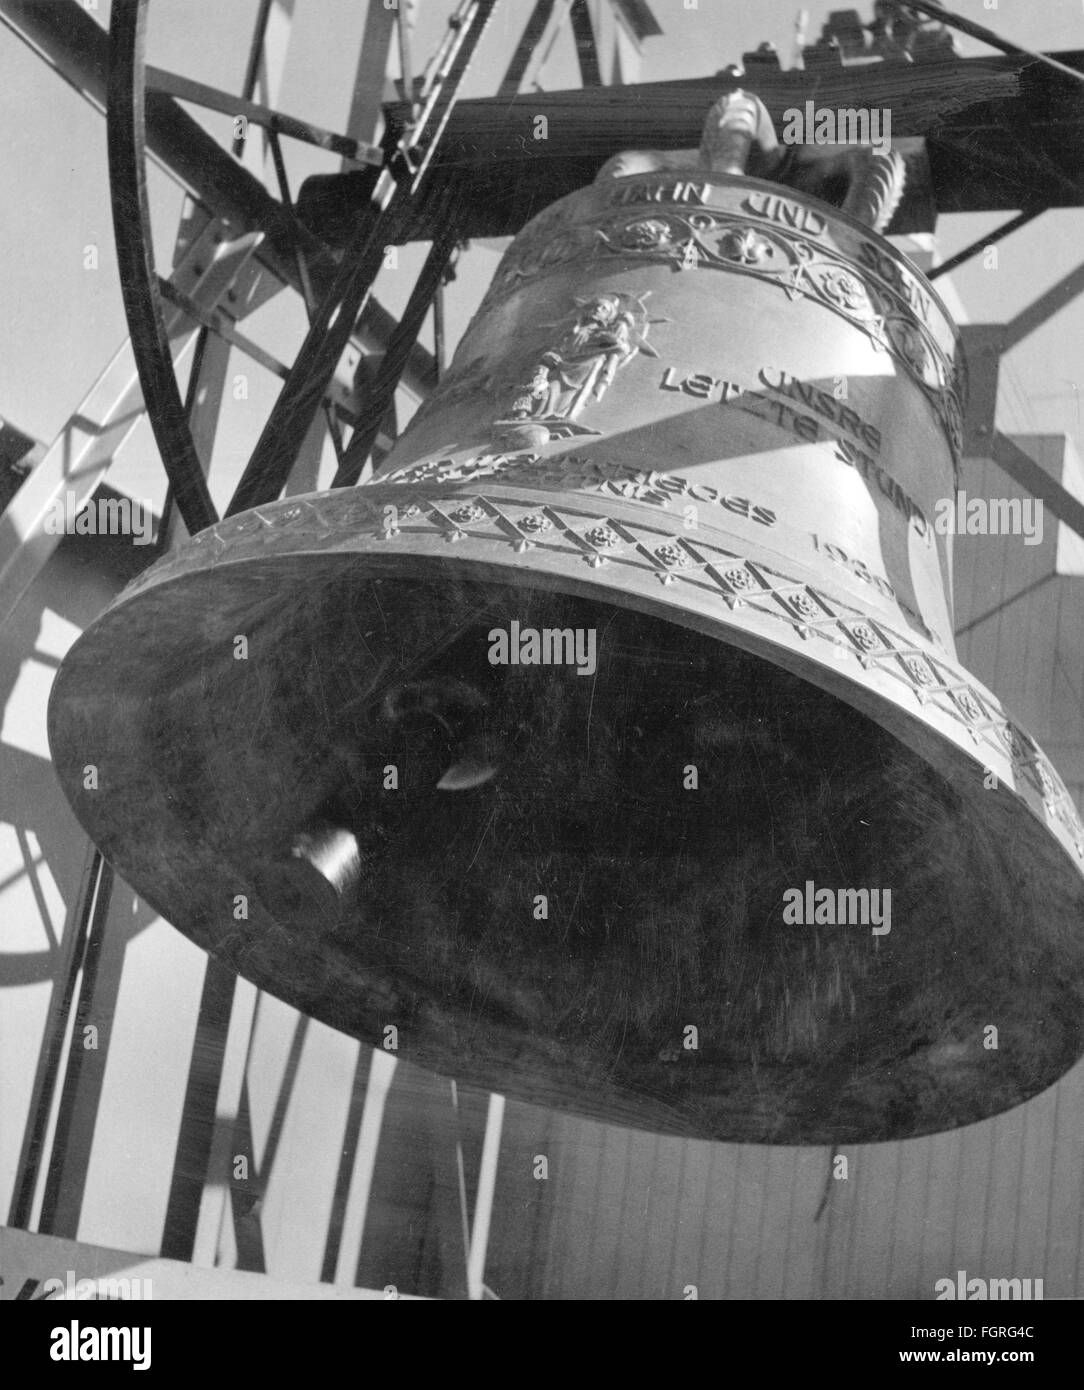 metal, bells, church bell with inscription 'Our Last Hour', 20th century, Additional-Rights-Clearences-Not Available Stock Photo